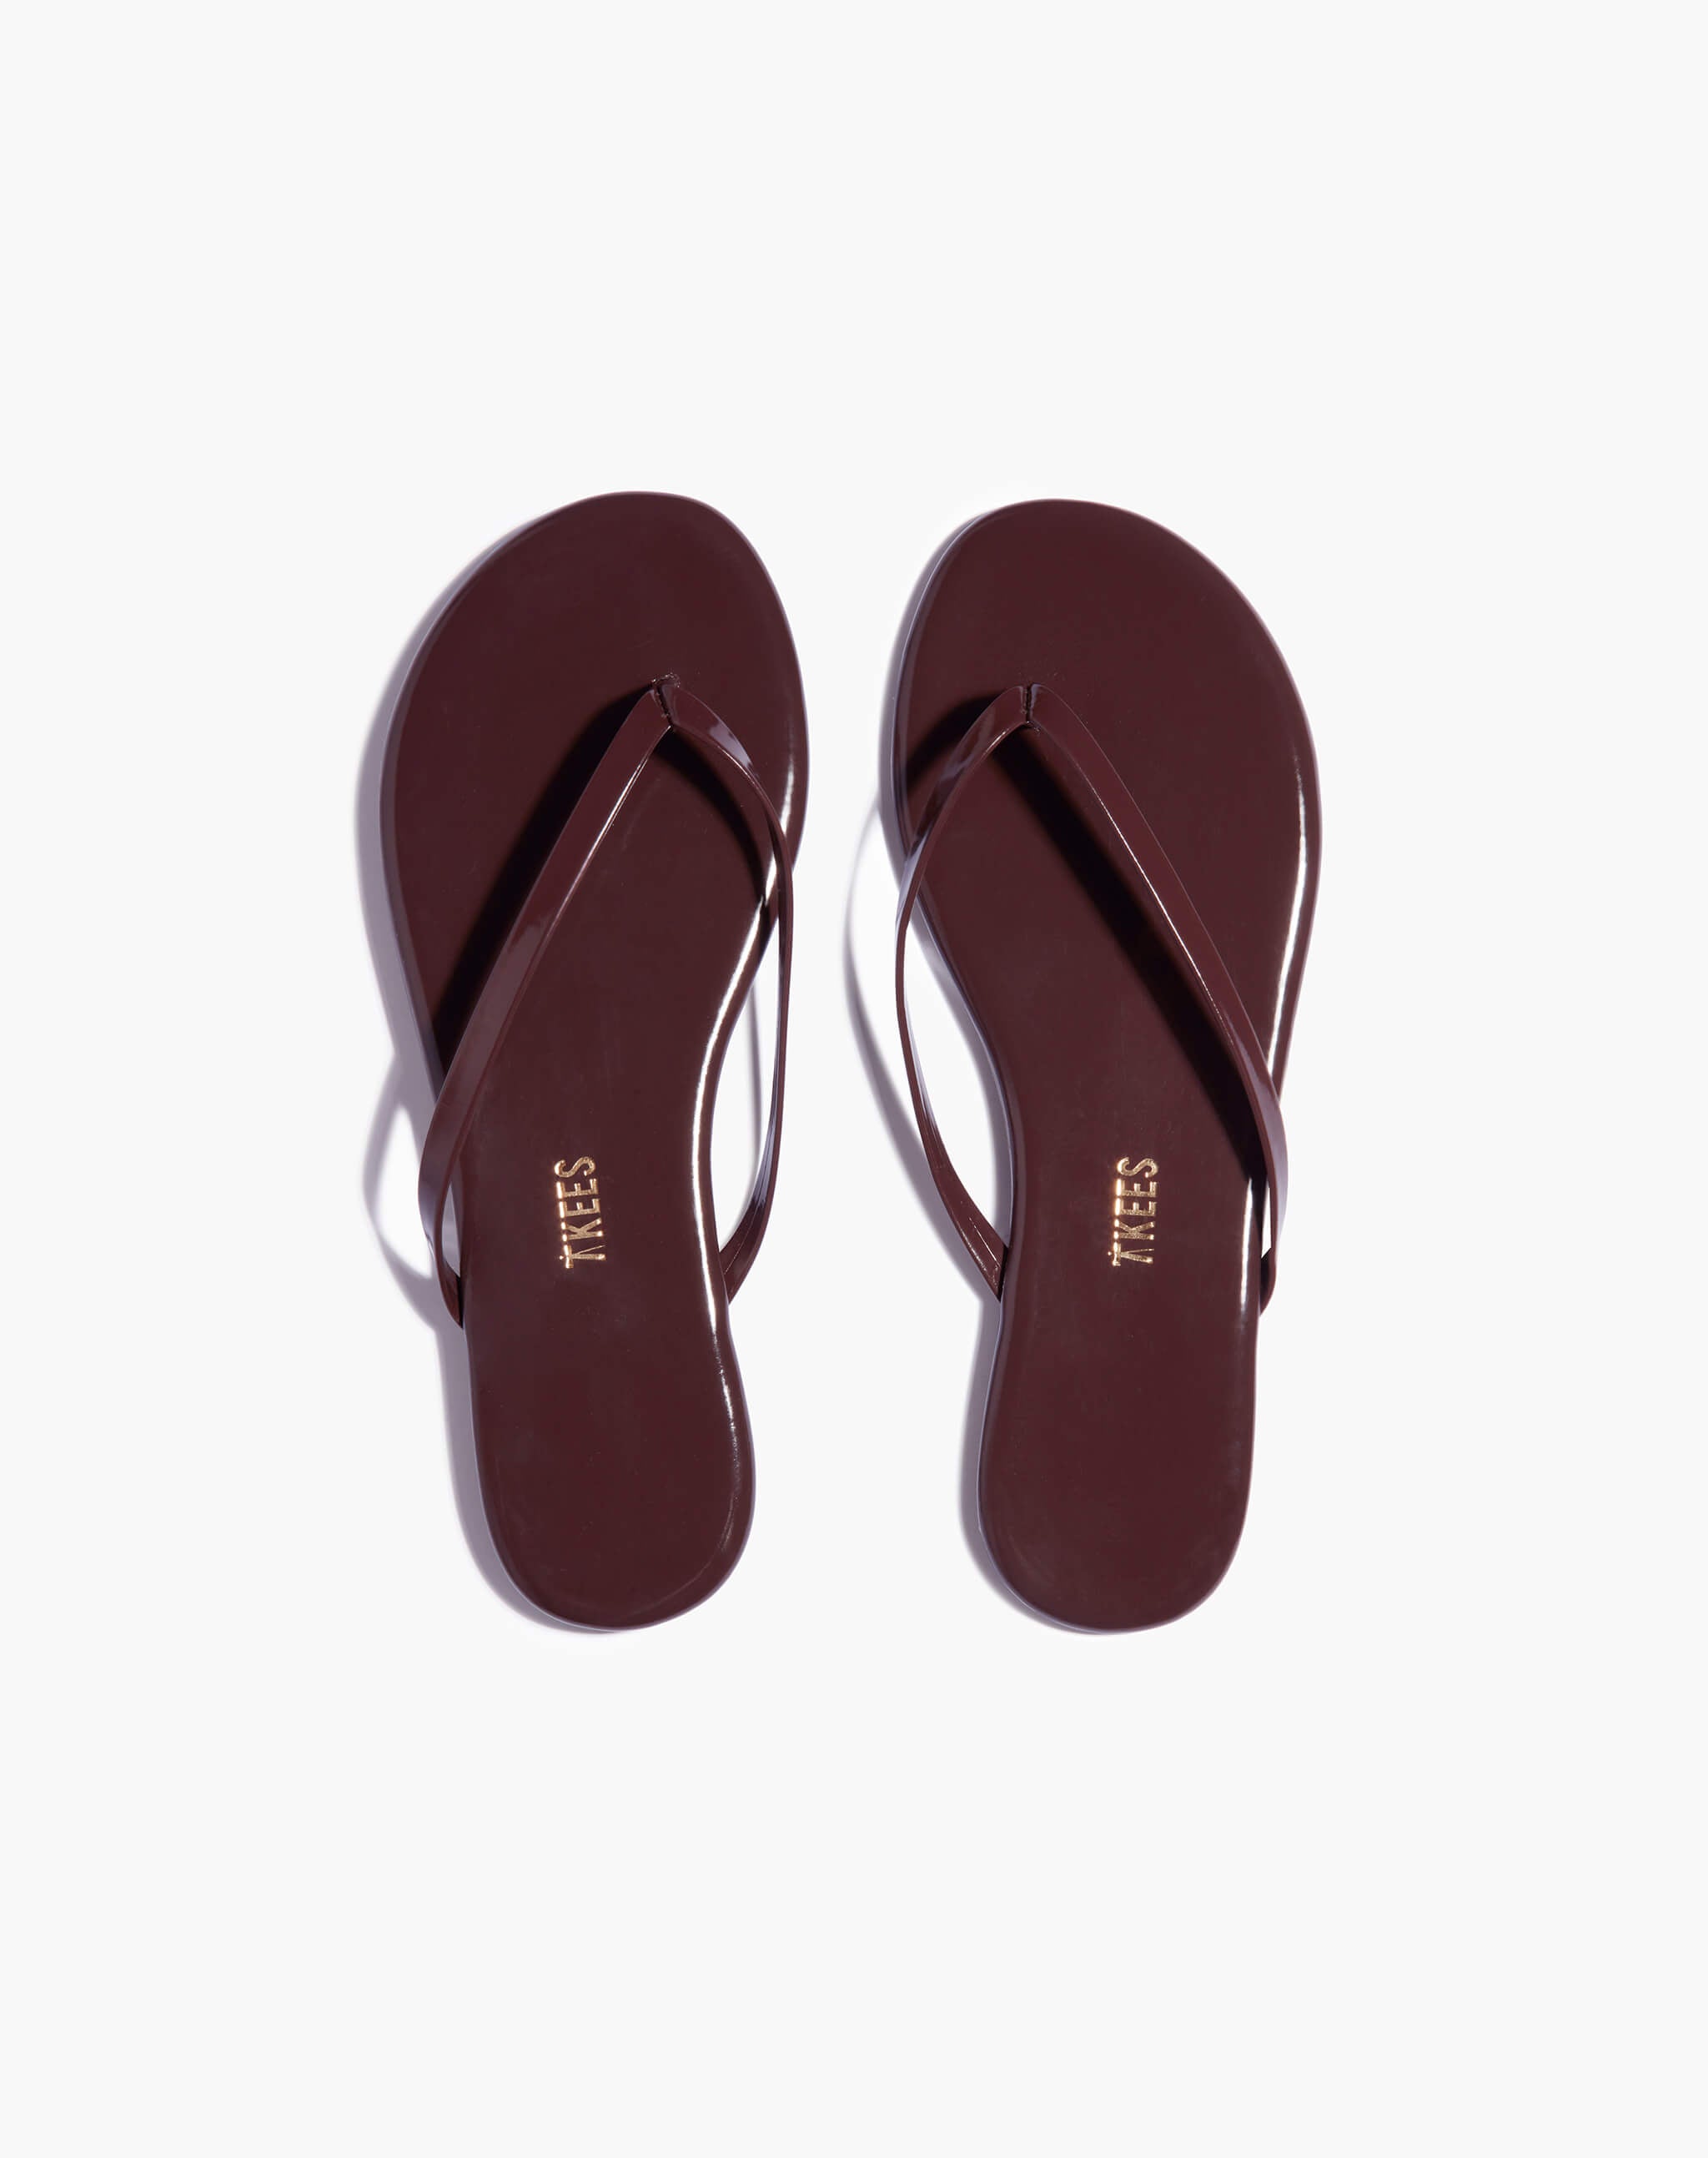 Lily Glosses in Glosses | Women's Sandals | TKEES – TKEES